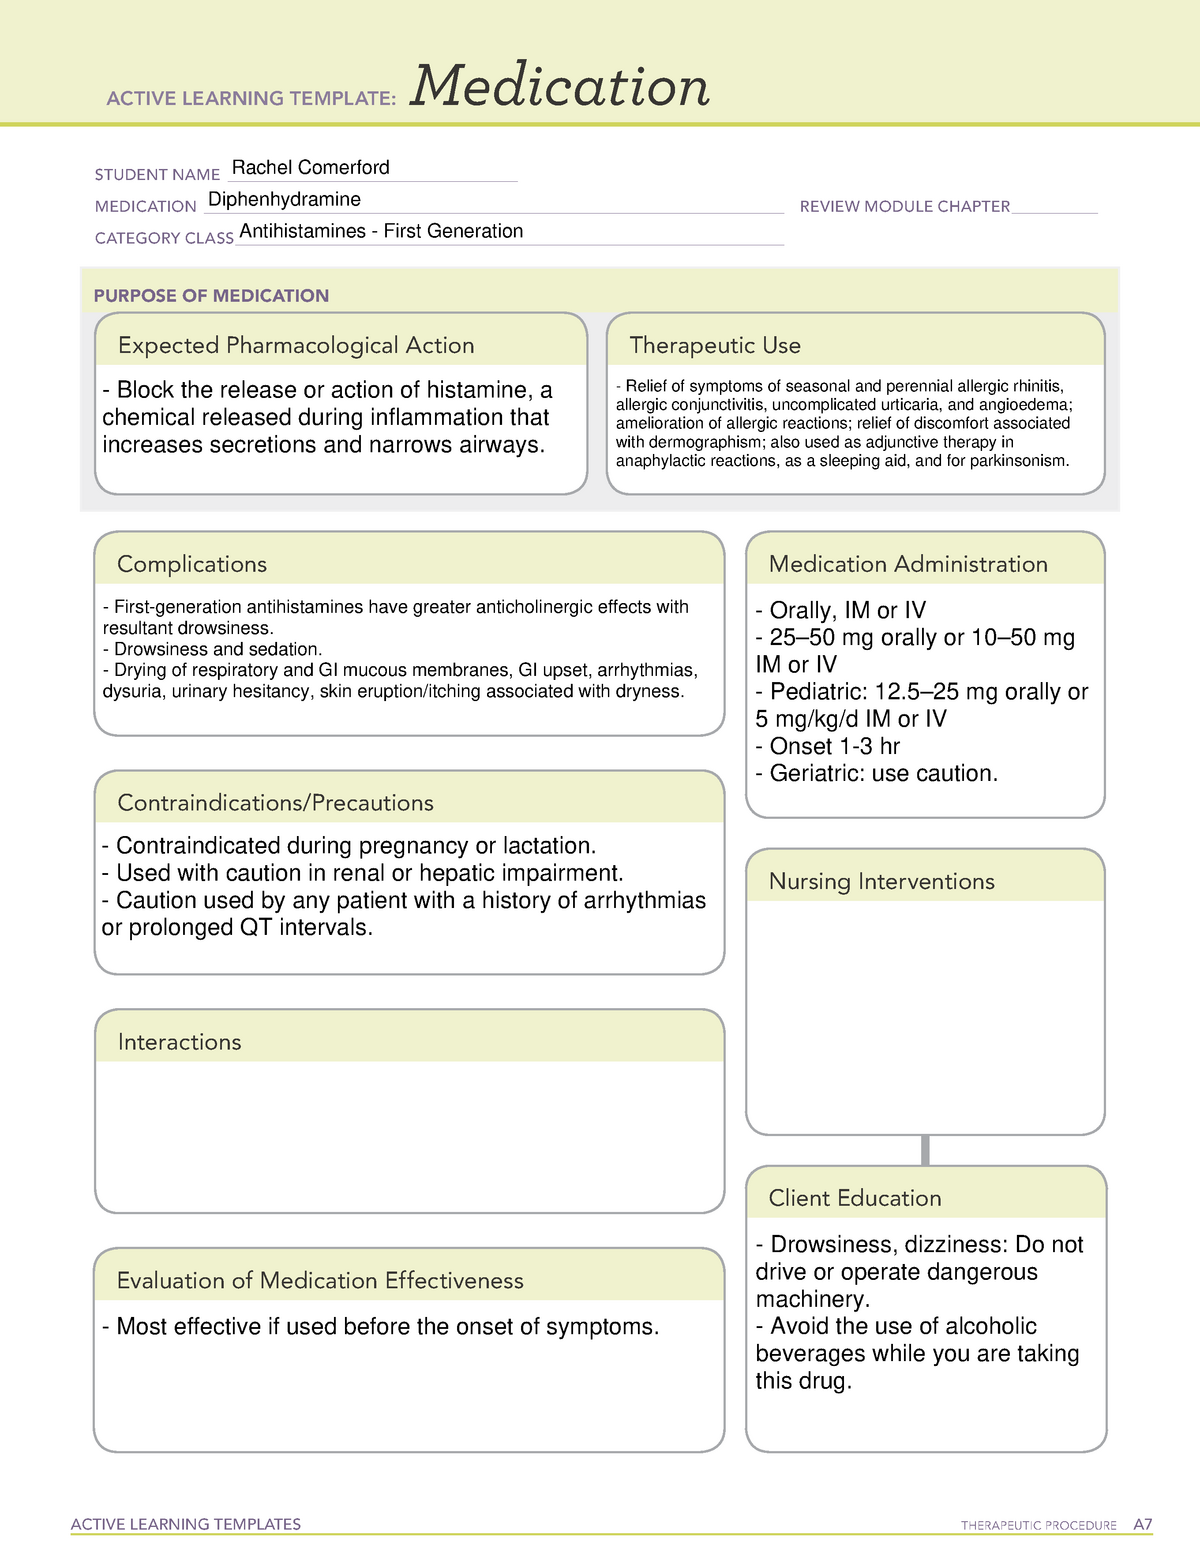 Diphenhydramine Notes ACTIVE LEARNING TEMPLATES THERAPEUTIC